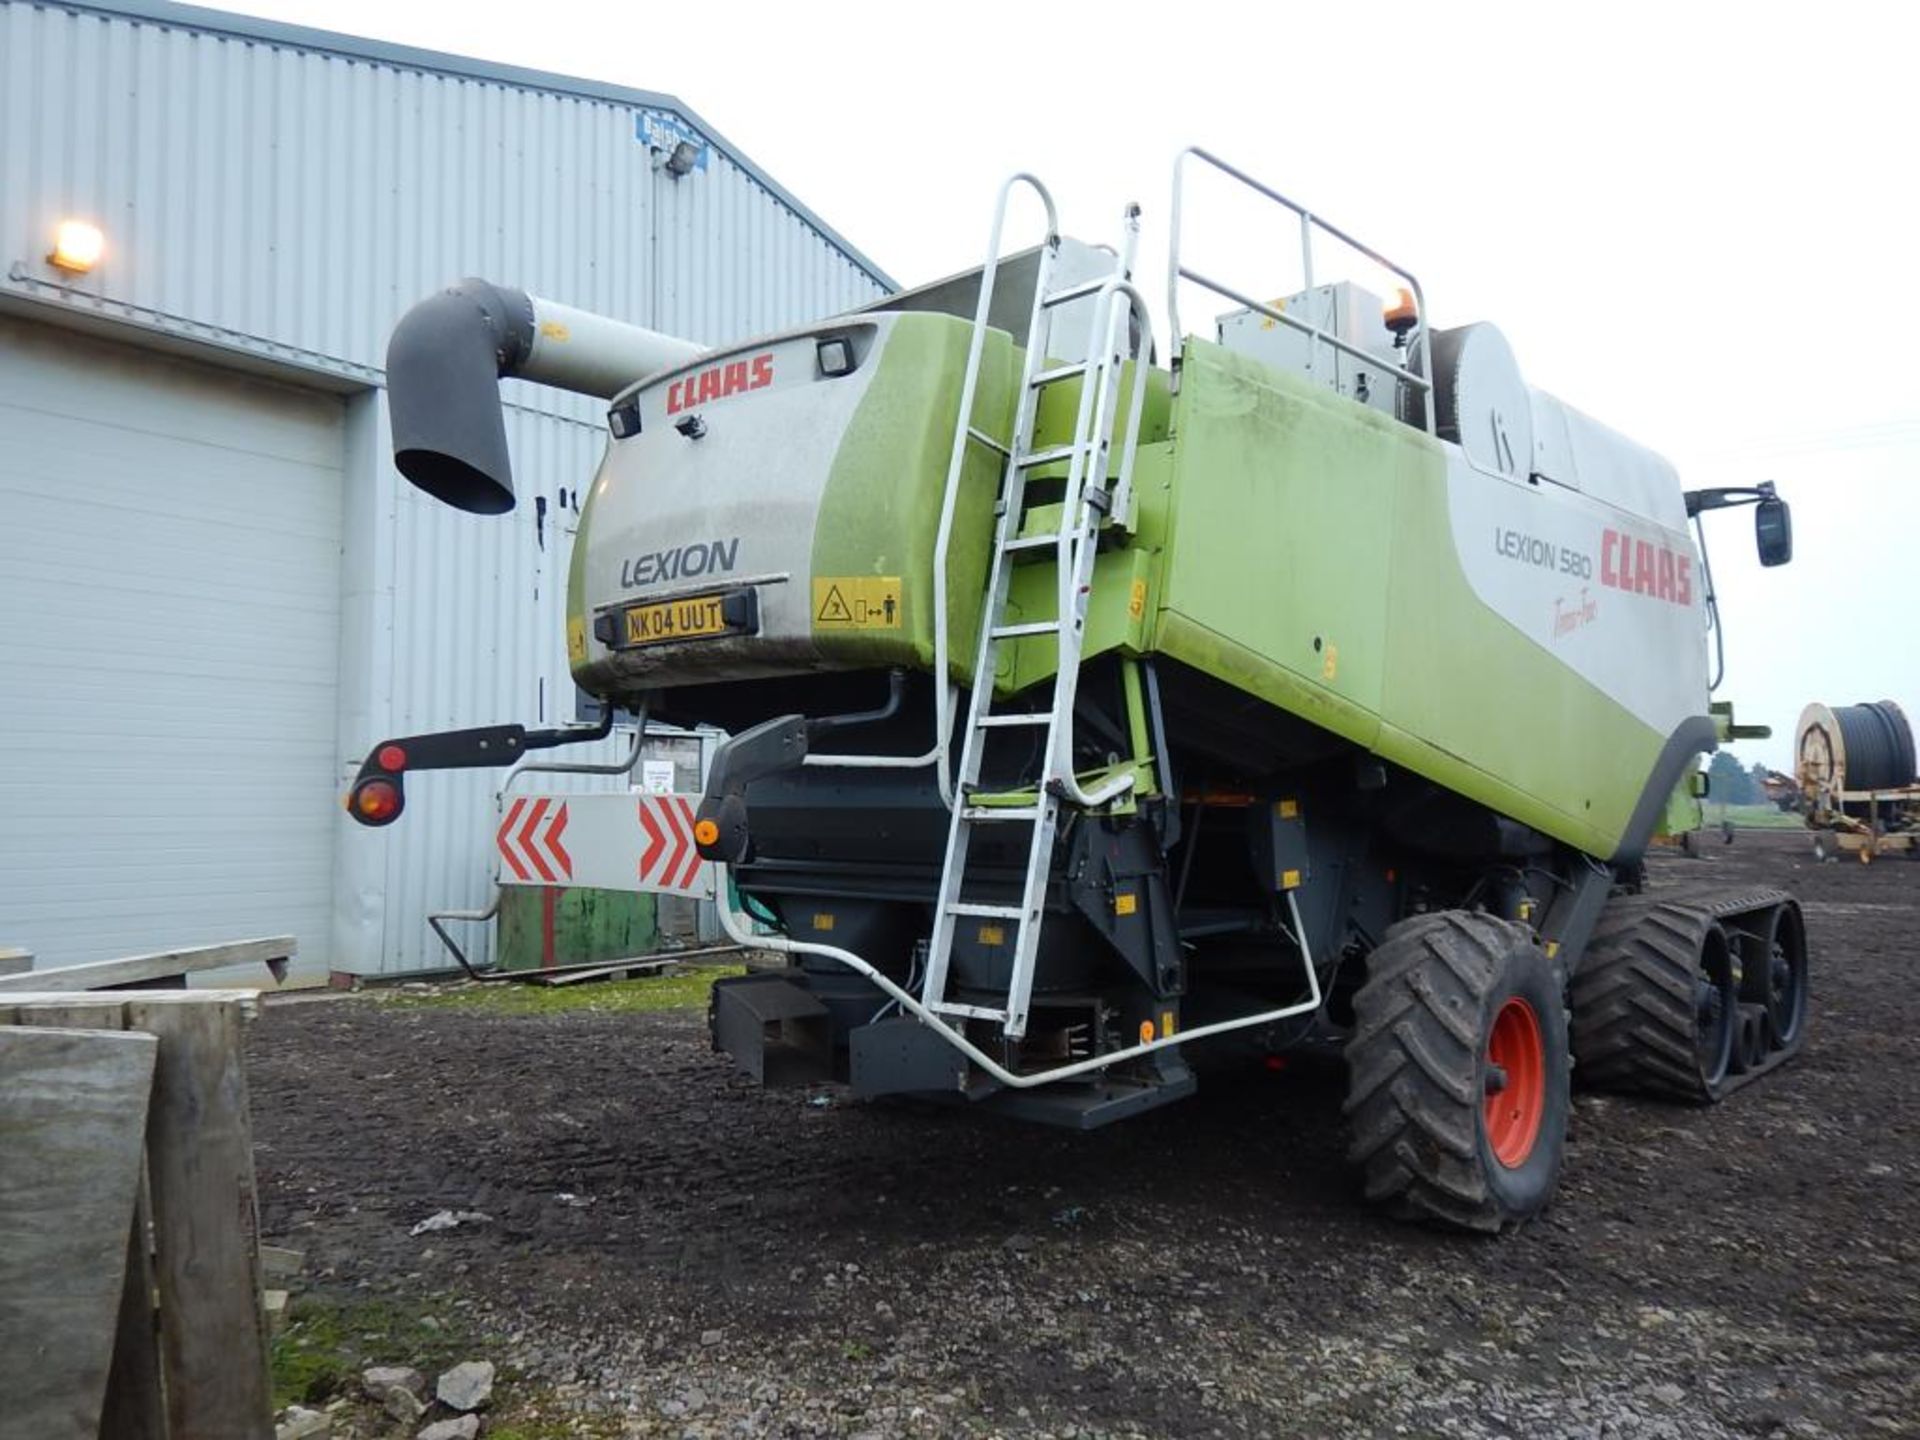 2004 CLAAS Lexion 580 Terra-Trac COMBINE HARVESTER Fitted with Claas Vario V900 Auto-Contour - Image 4 of 8